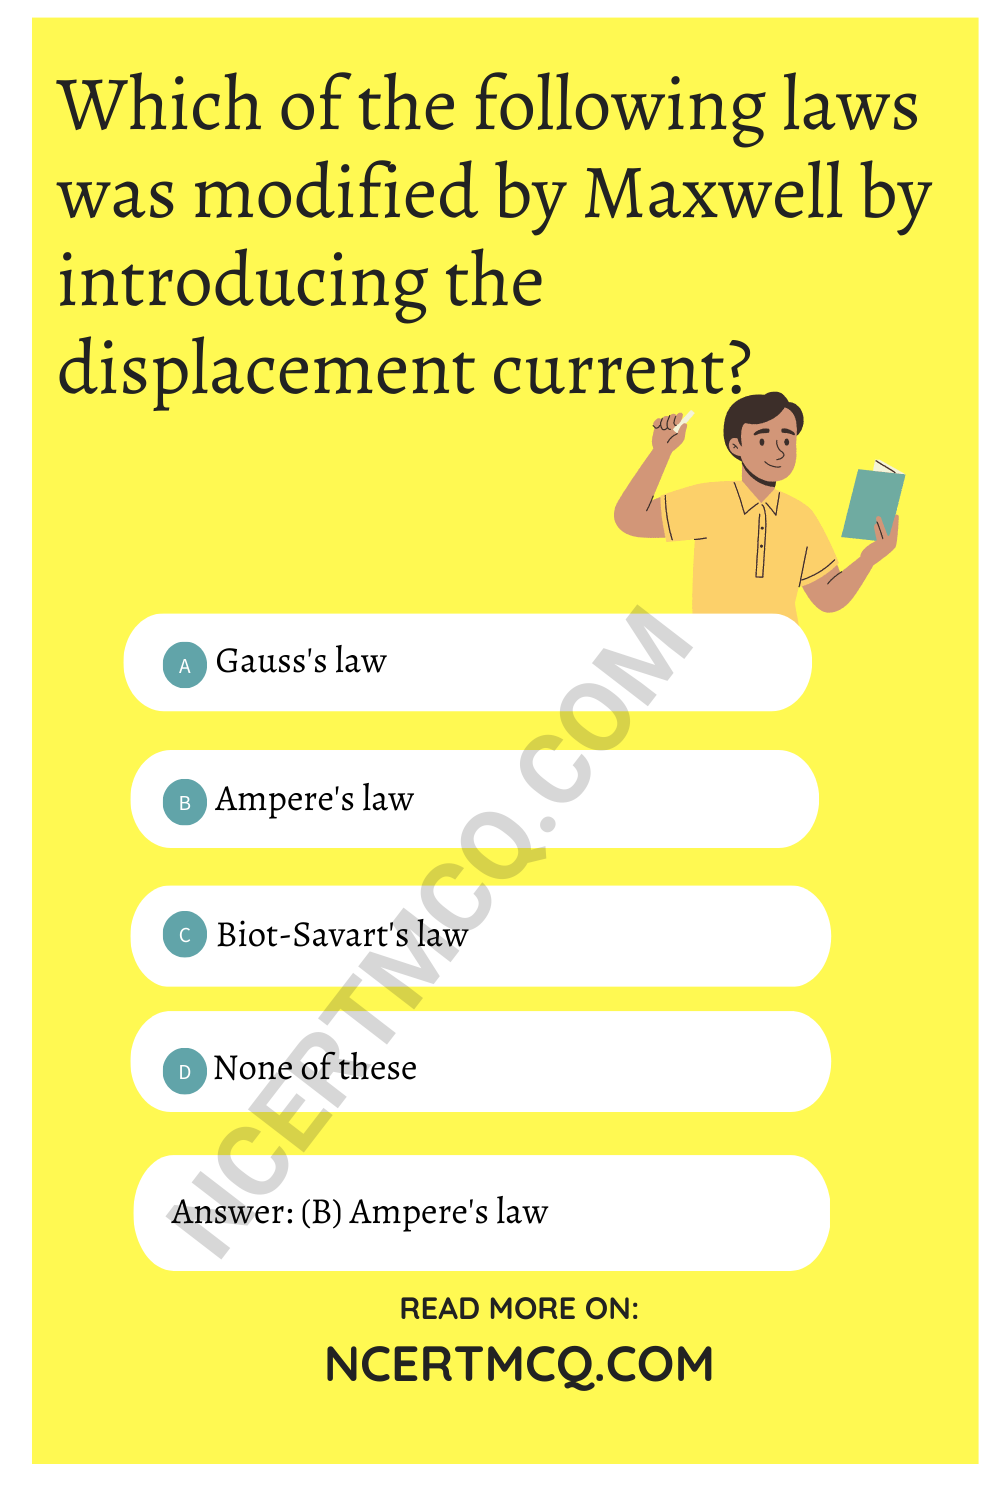 Which of the following laws was modified by Maxwell by introducing the displacement current?